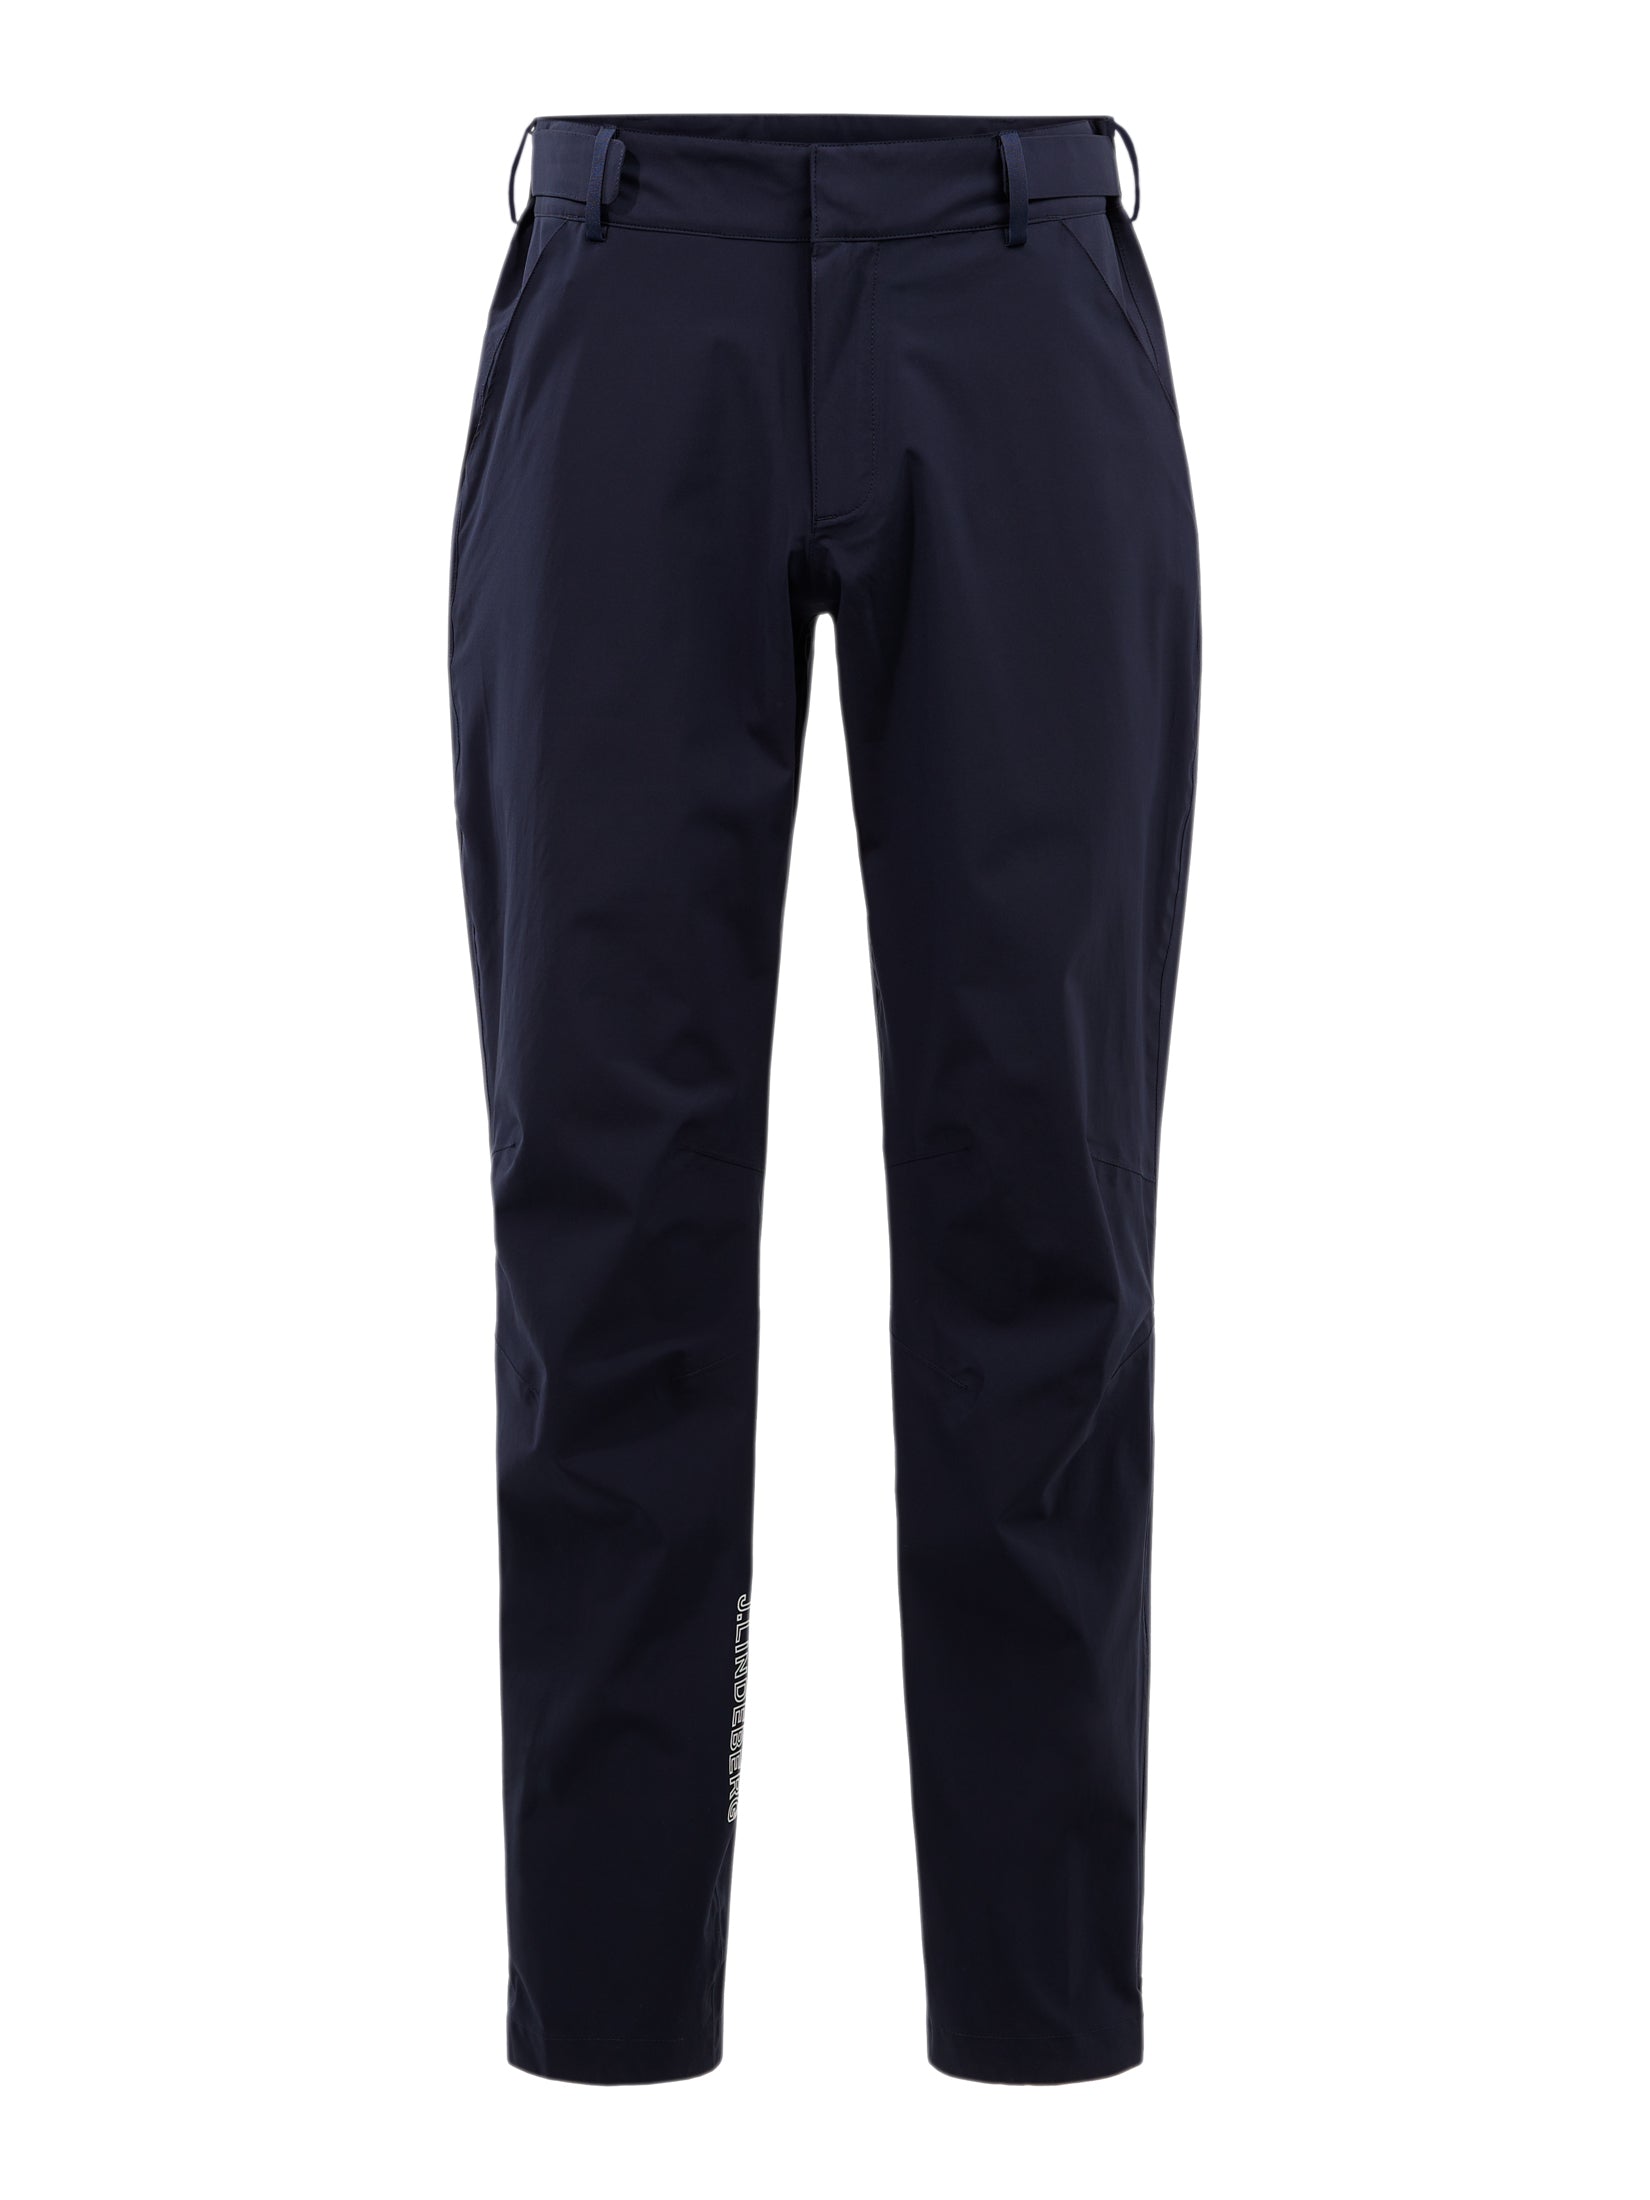 J.Lindeberg Axil Fleece Twill Pant Thermo Pants in light gray buy